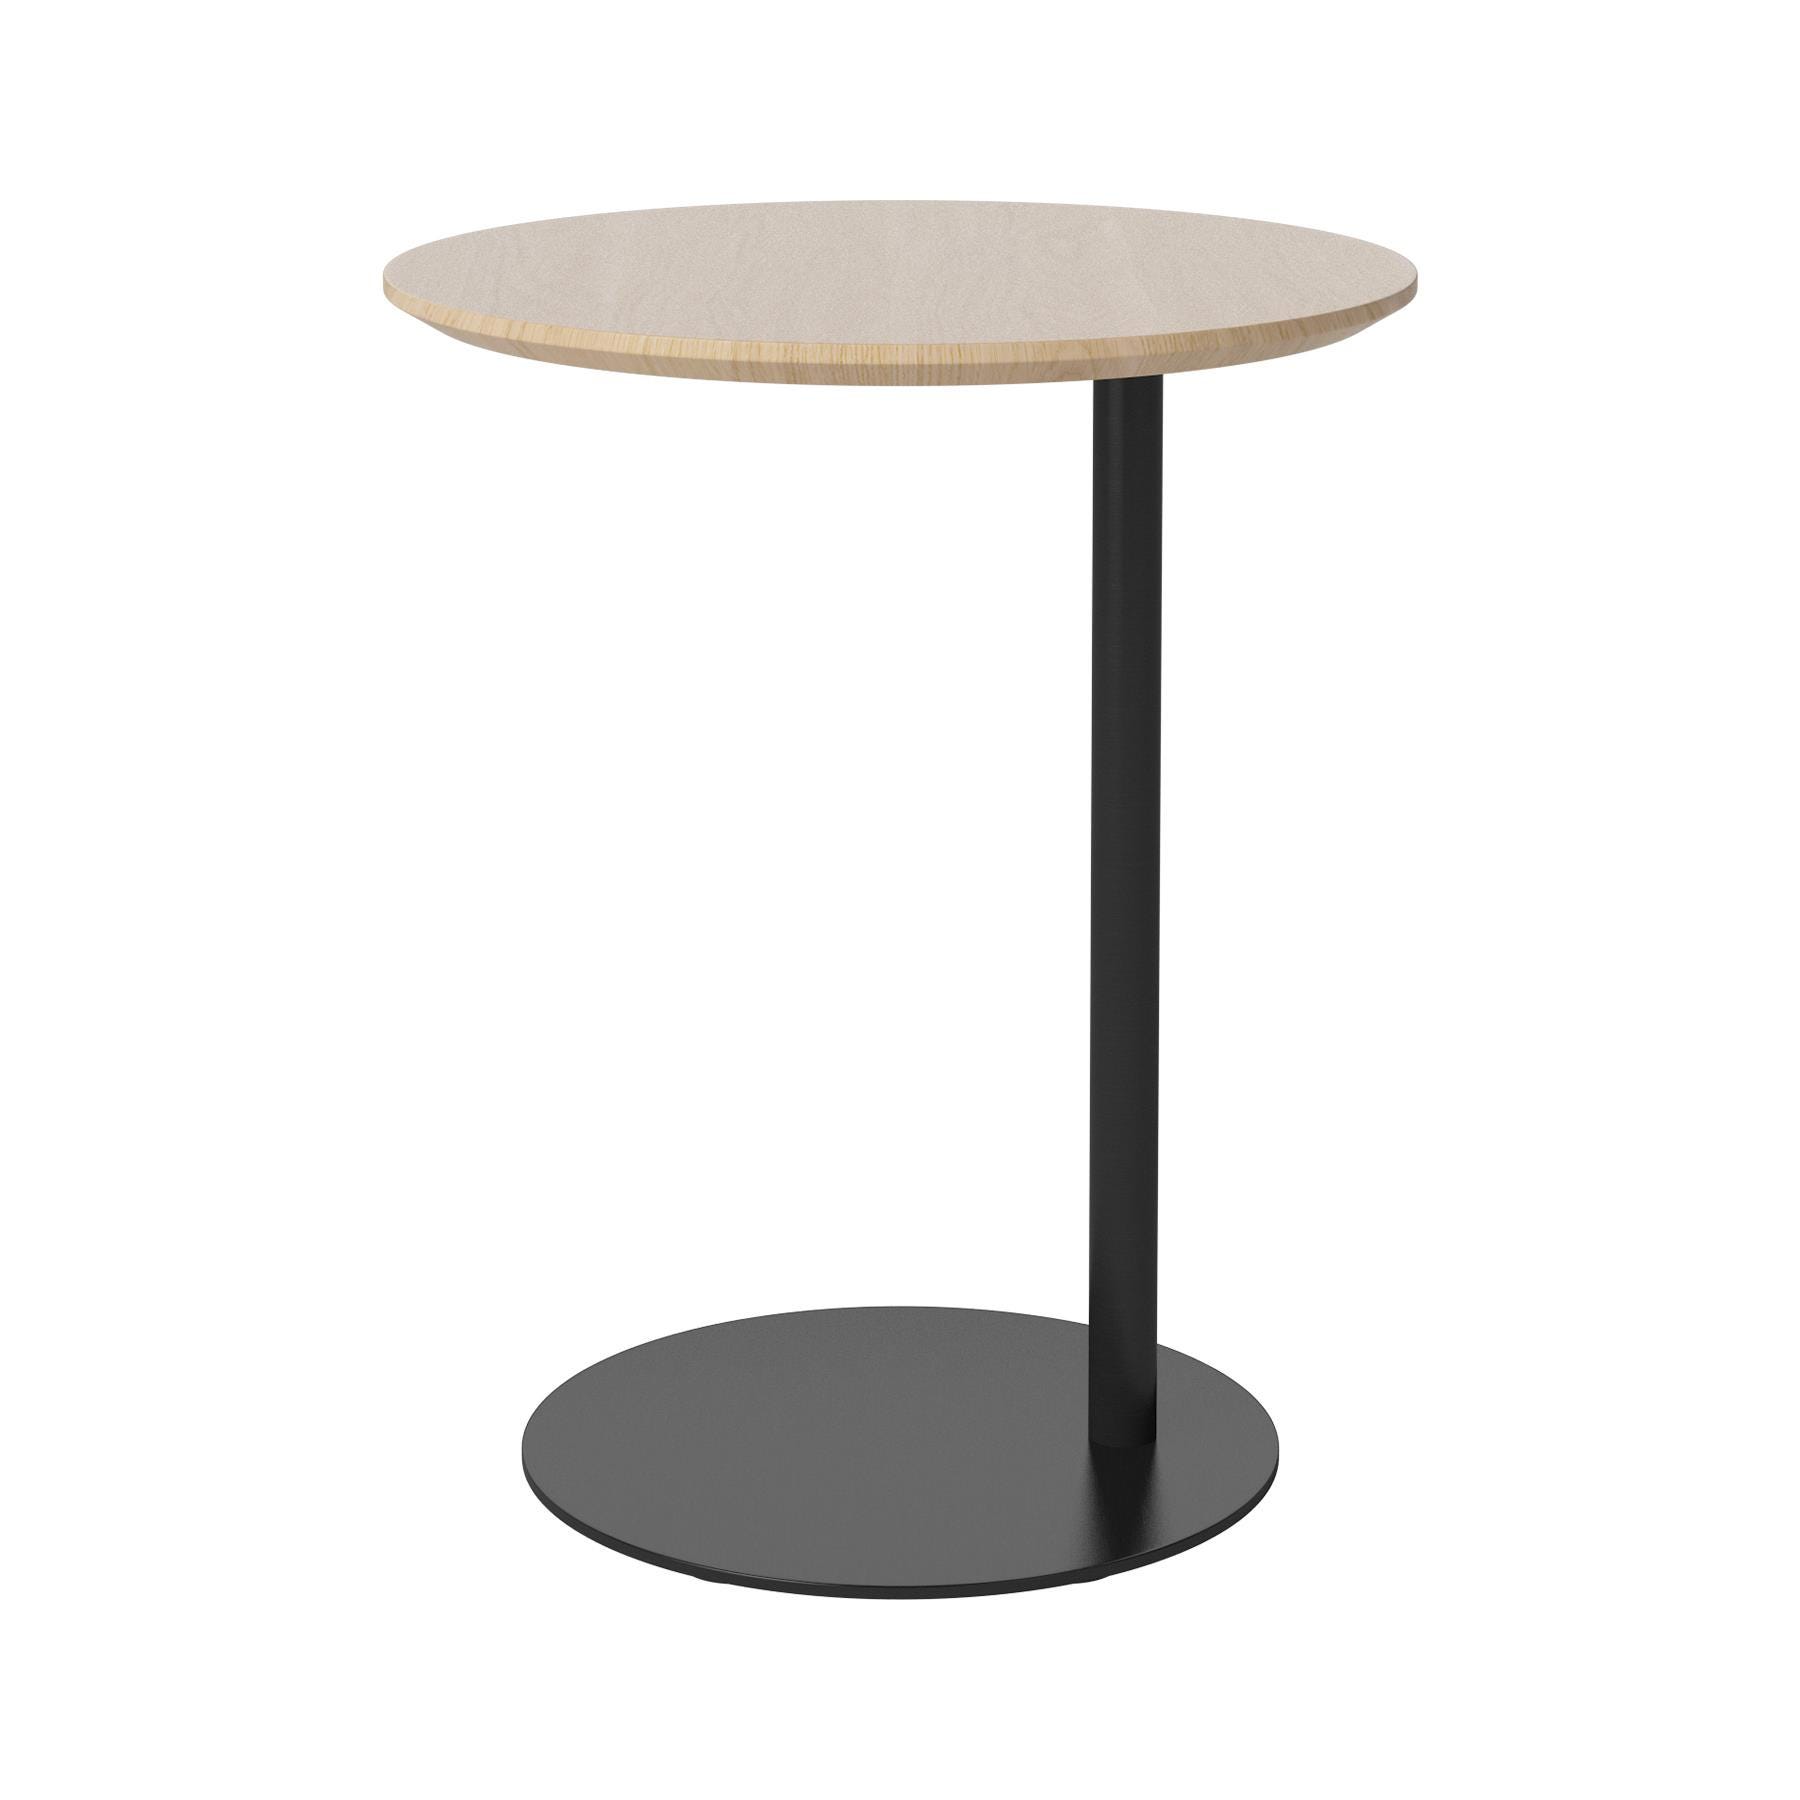 Bolia Pillar Side Table White Oiled Oak Black Lacquered Steel Light Wood Designer Furniture From Holloways Of Ludlow